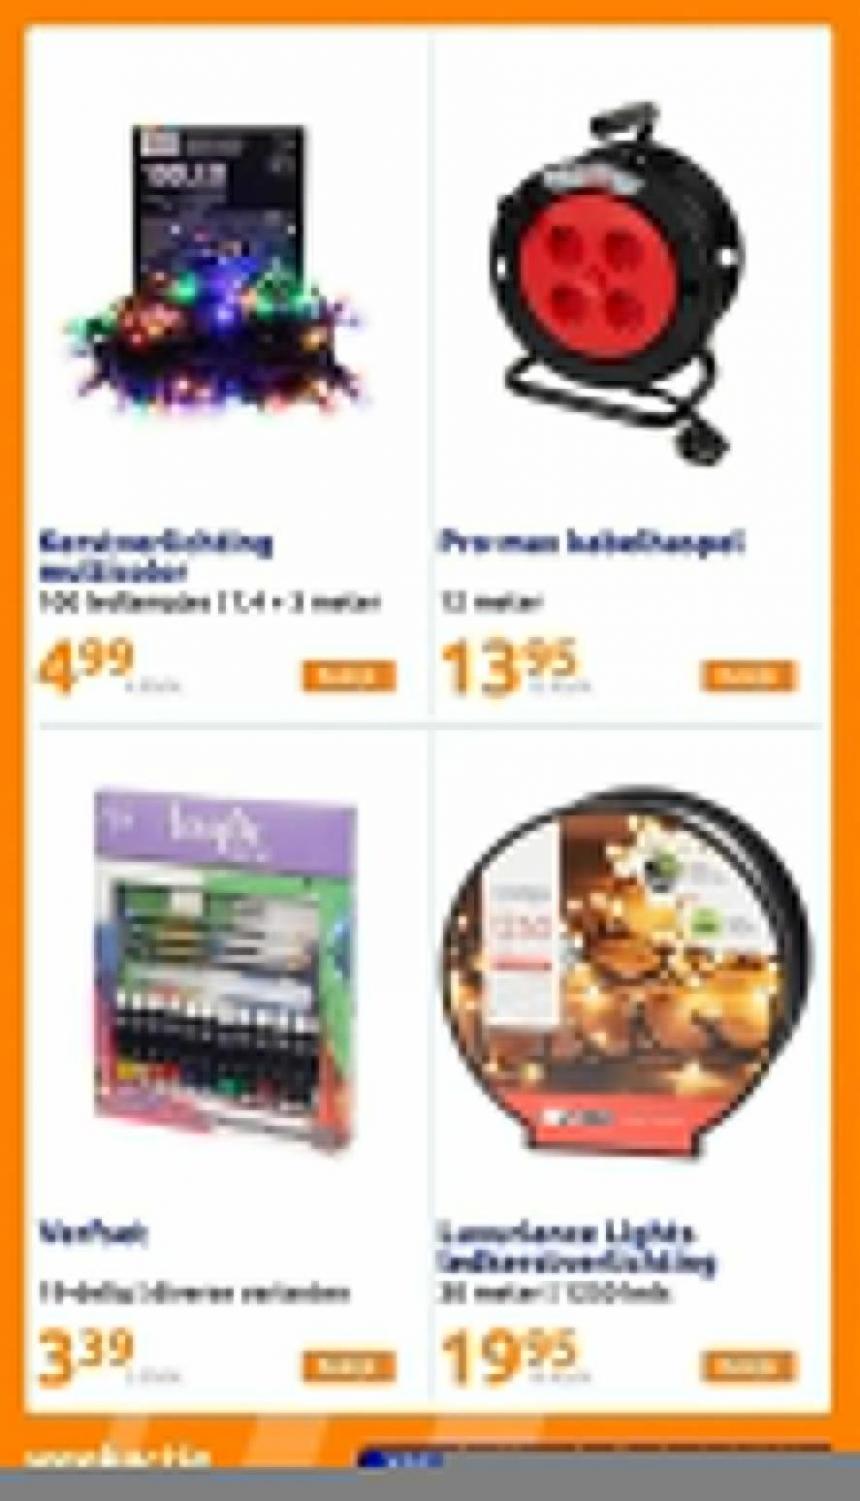 Kerstdeal. Page 2